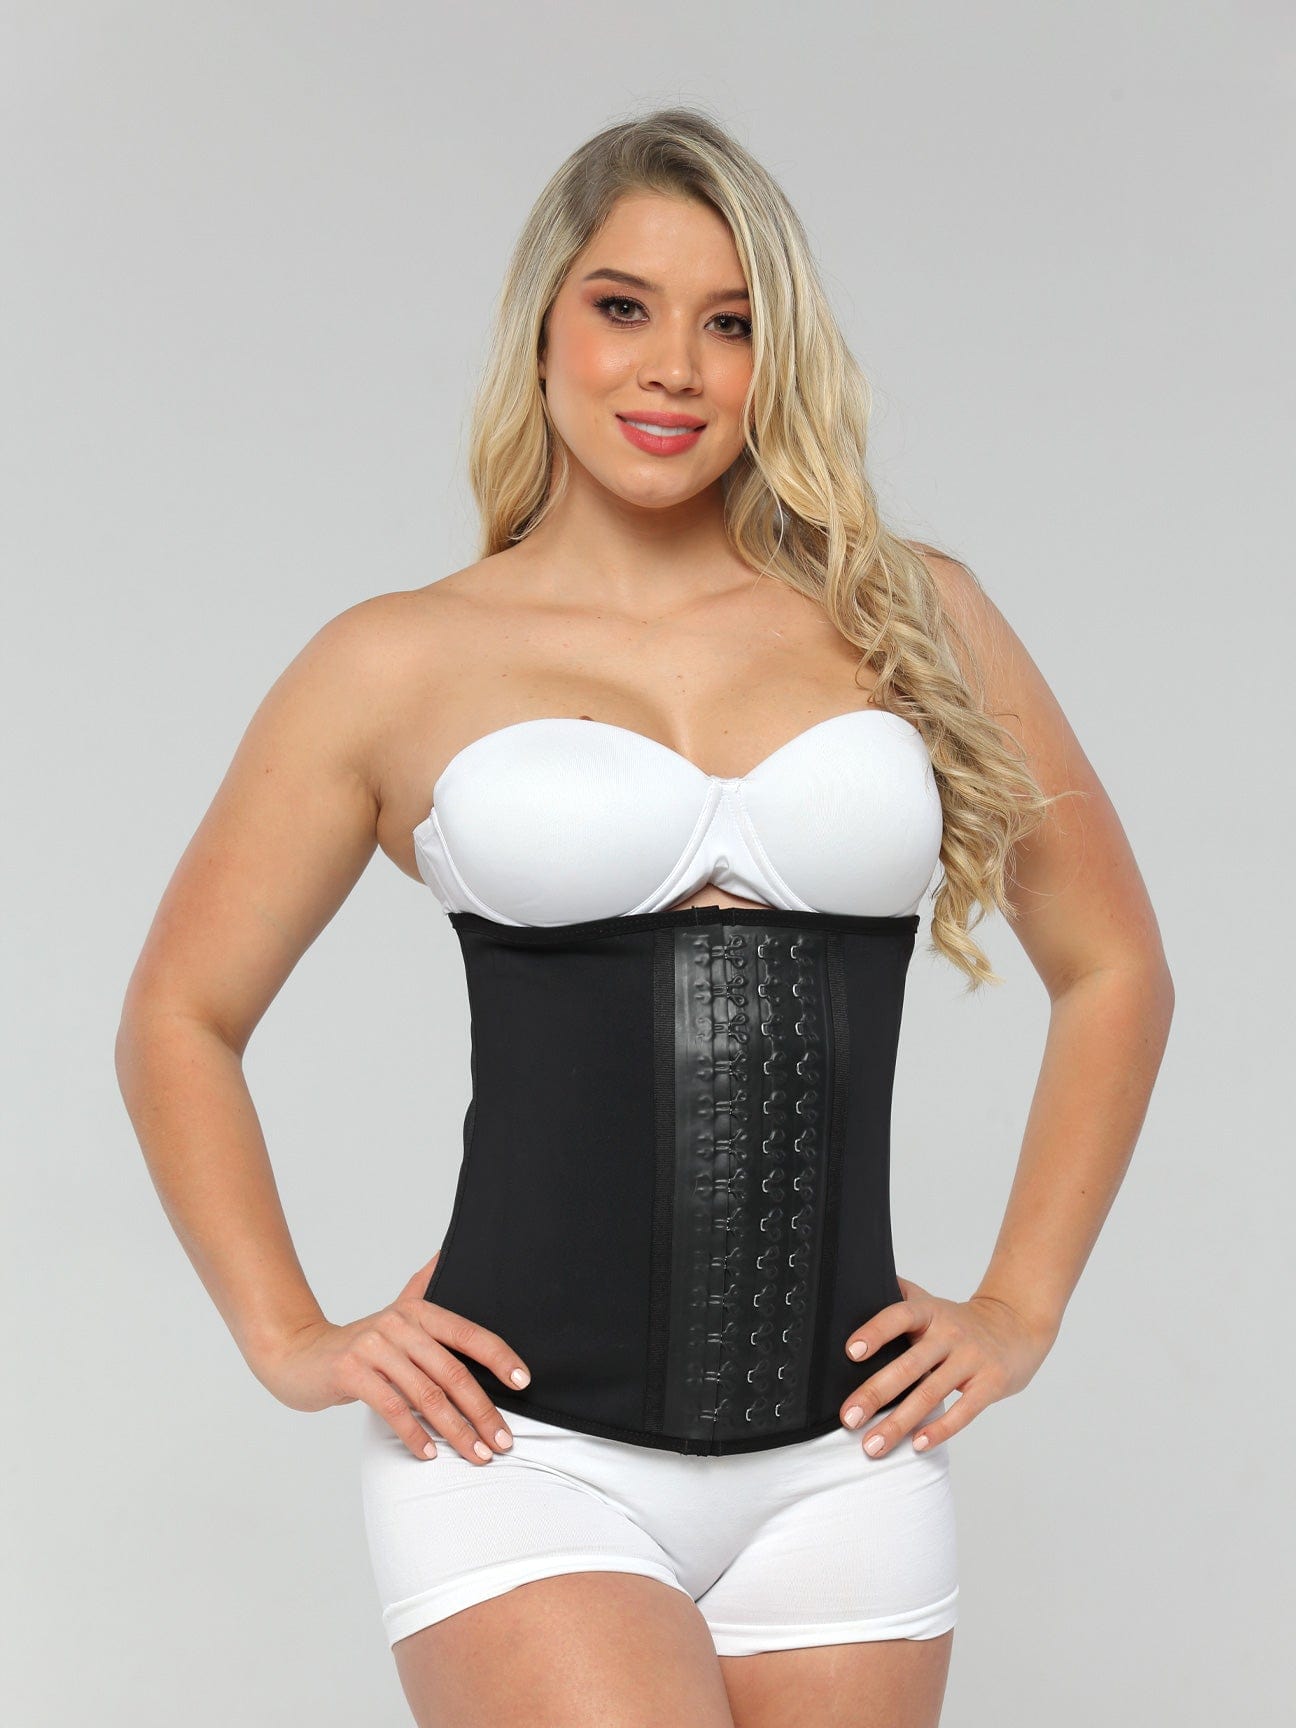 Colombian Waist trainer ( Ref O-061 )